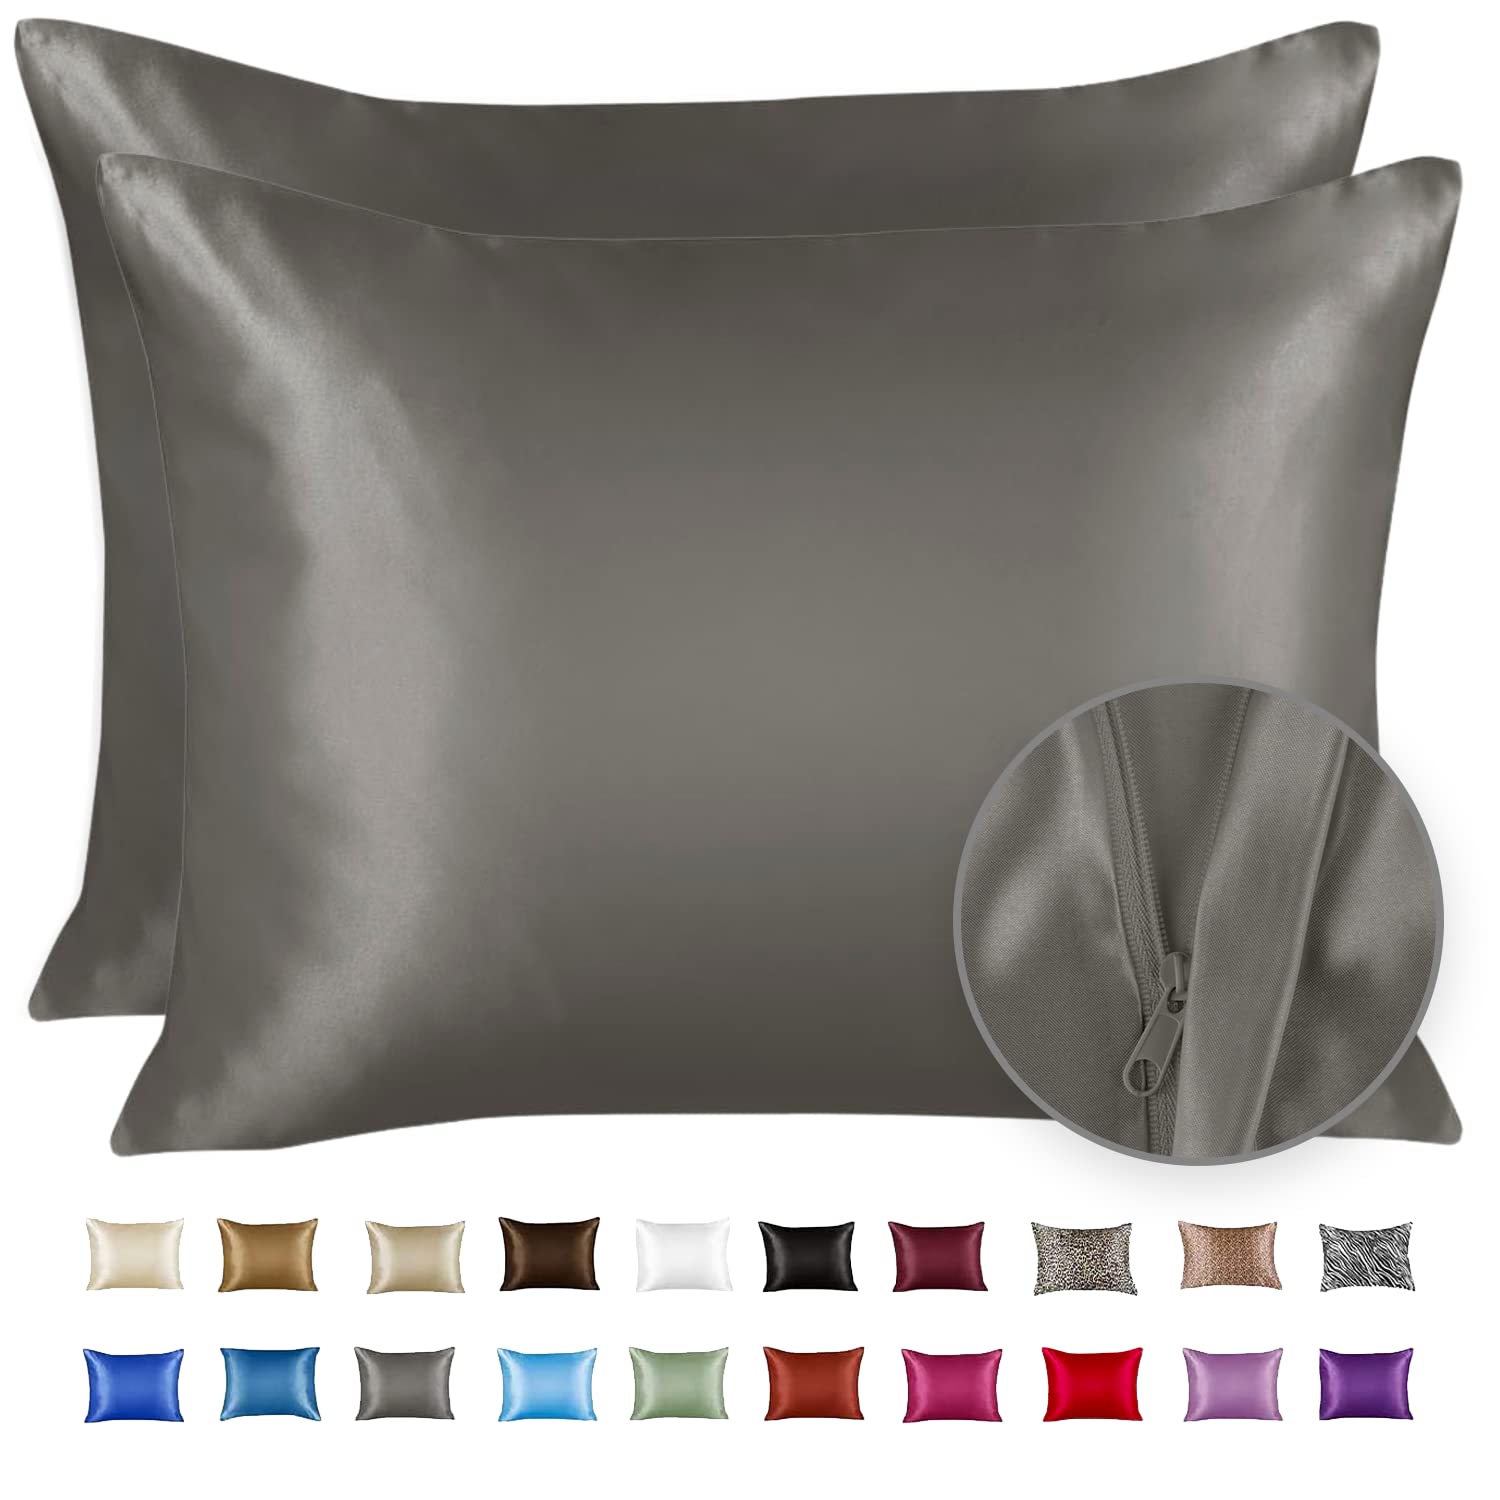 Great Choice Products Luxury Satin Pillowcase For Hair – King Satin Pillowcase With Zipper, Silver Grey (Pillowcase Set Of 2) – Blissford